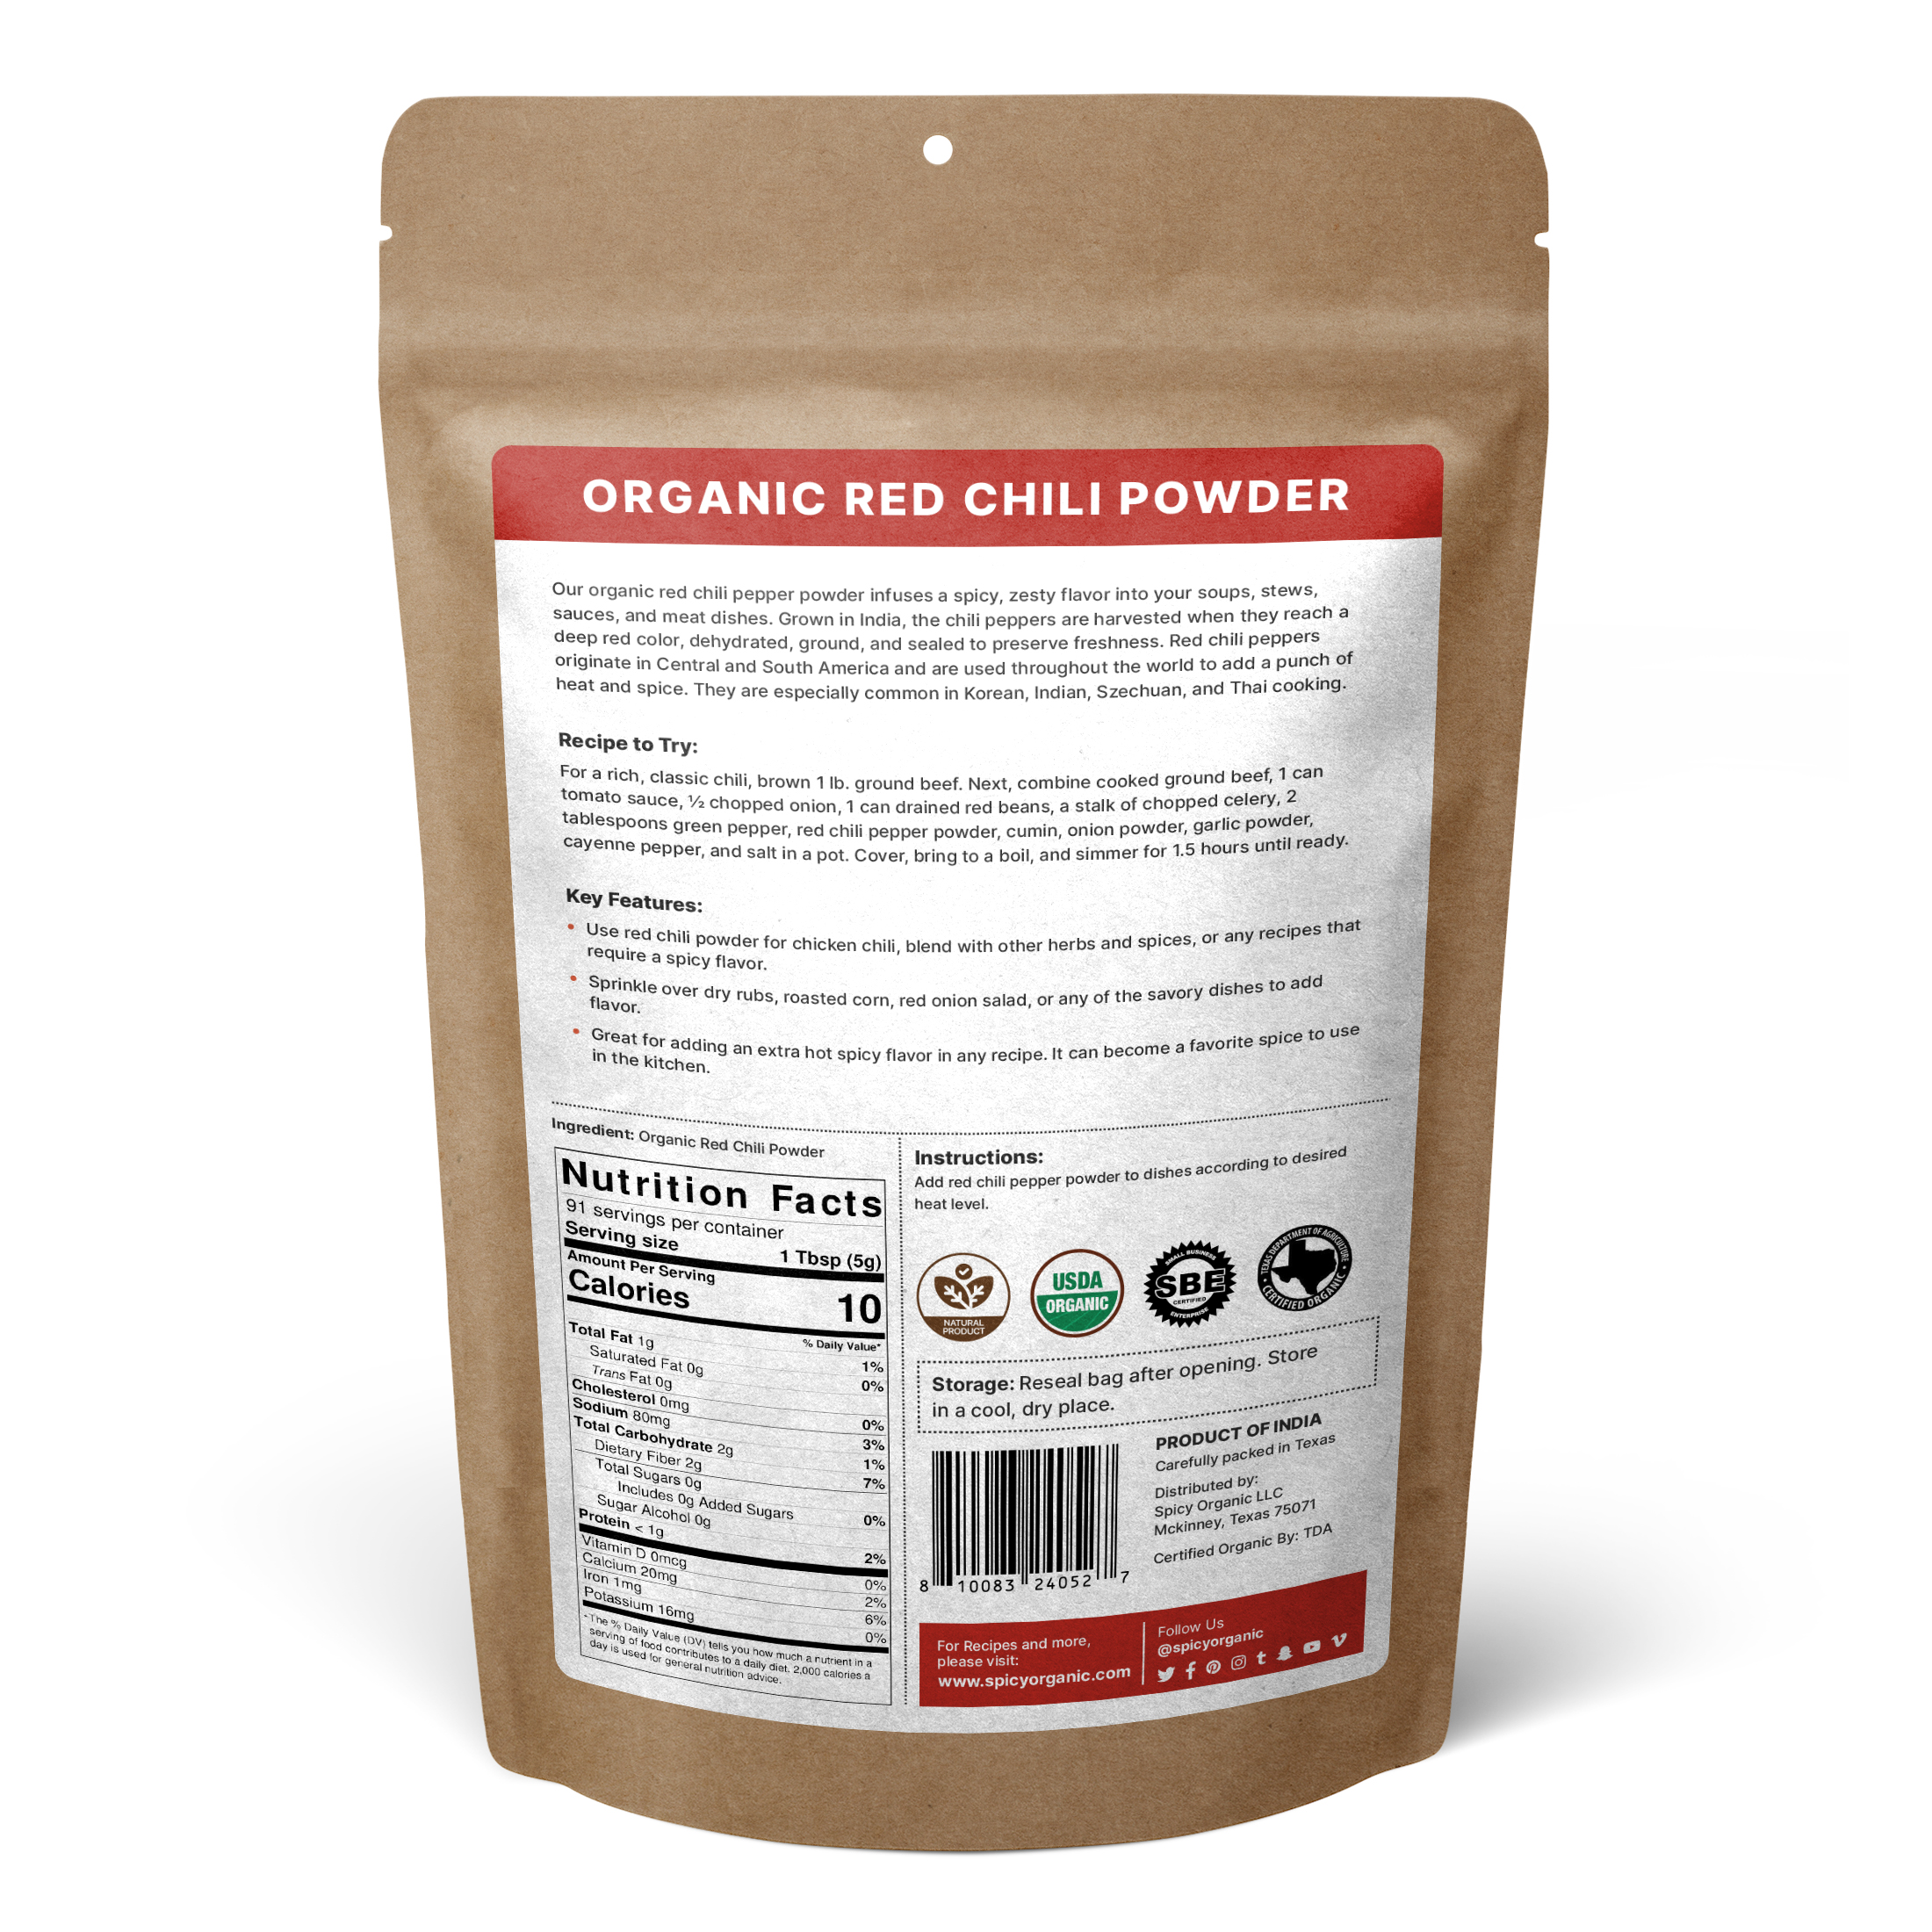 Organic Red Chili Powder: 100% Pure and Natural, Perfect for Spicy Cooking- Add Heat and Flavor to Your Dishes - image 2 of 3